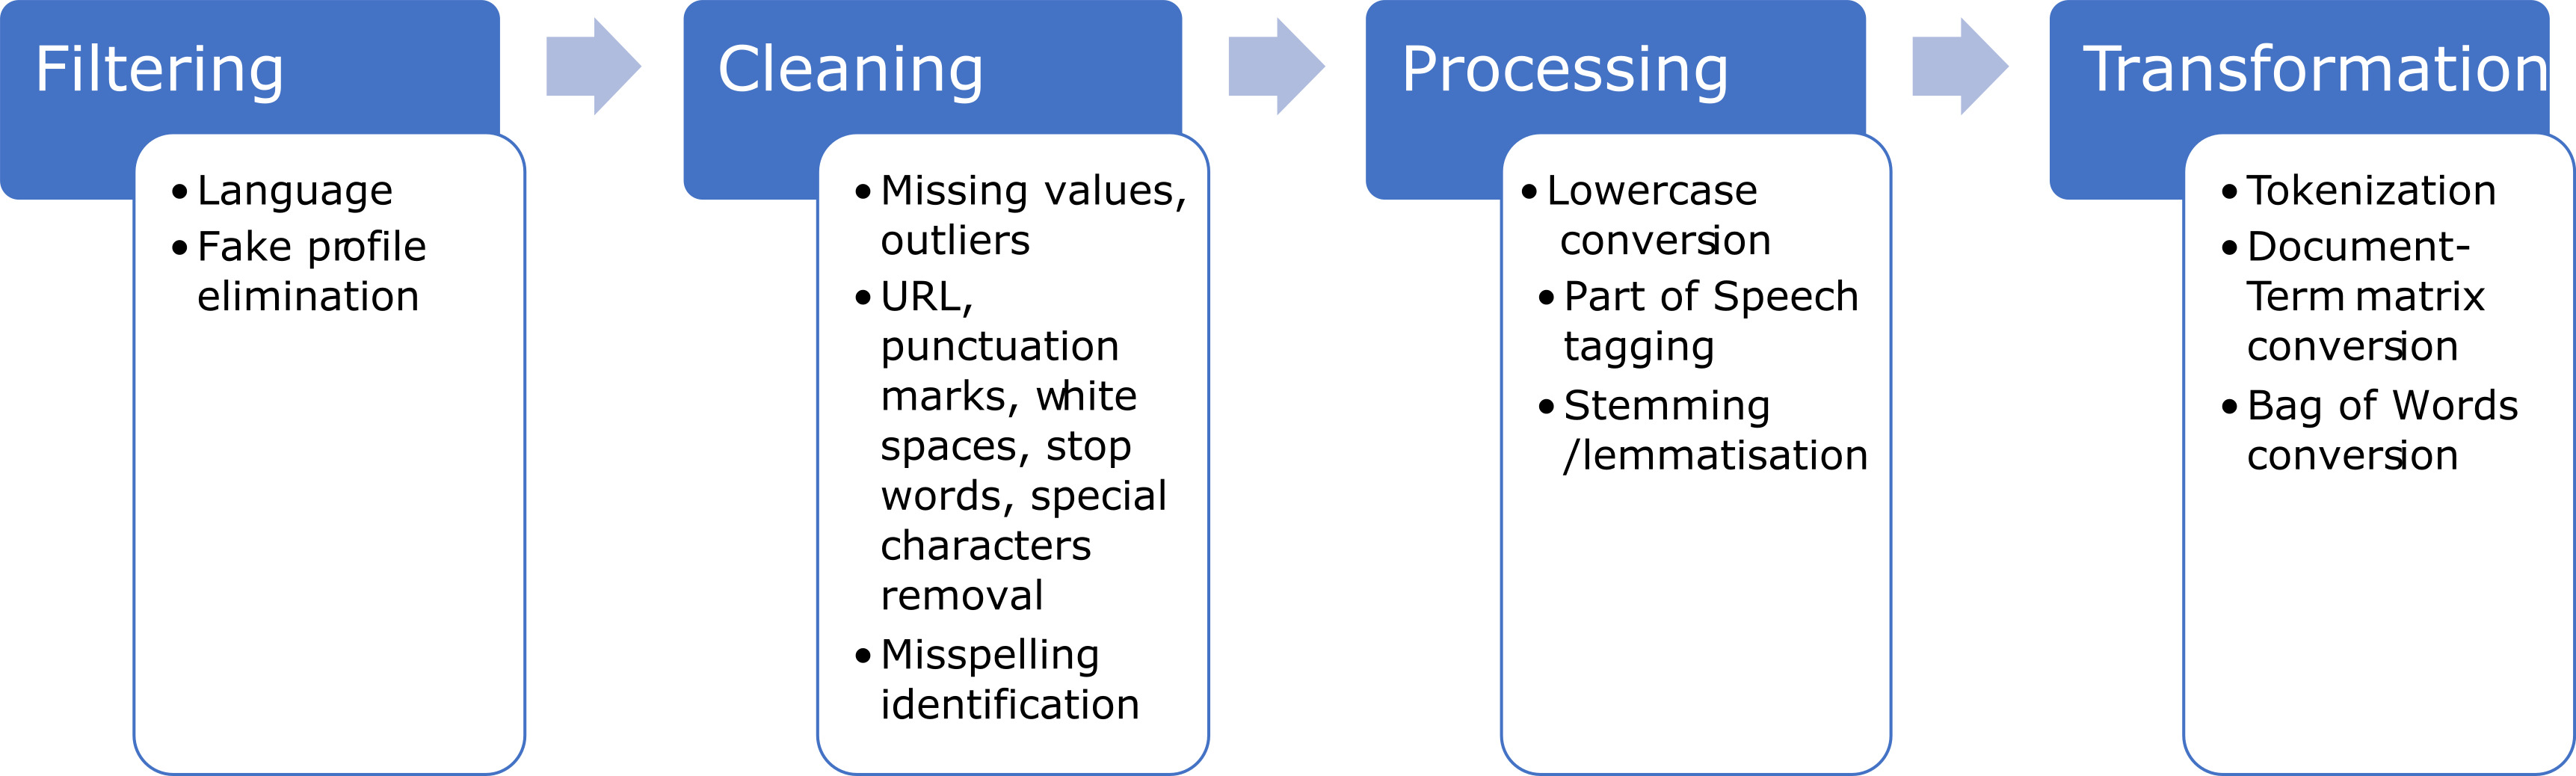 Summary of common steps in the pre-processing stage for textual data.